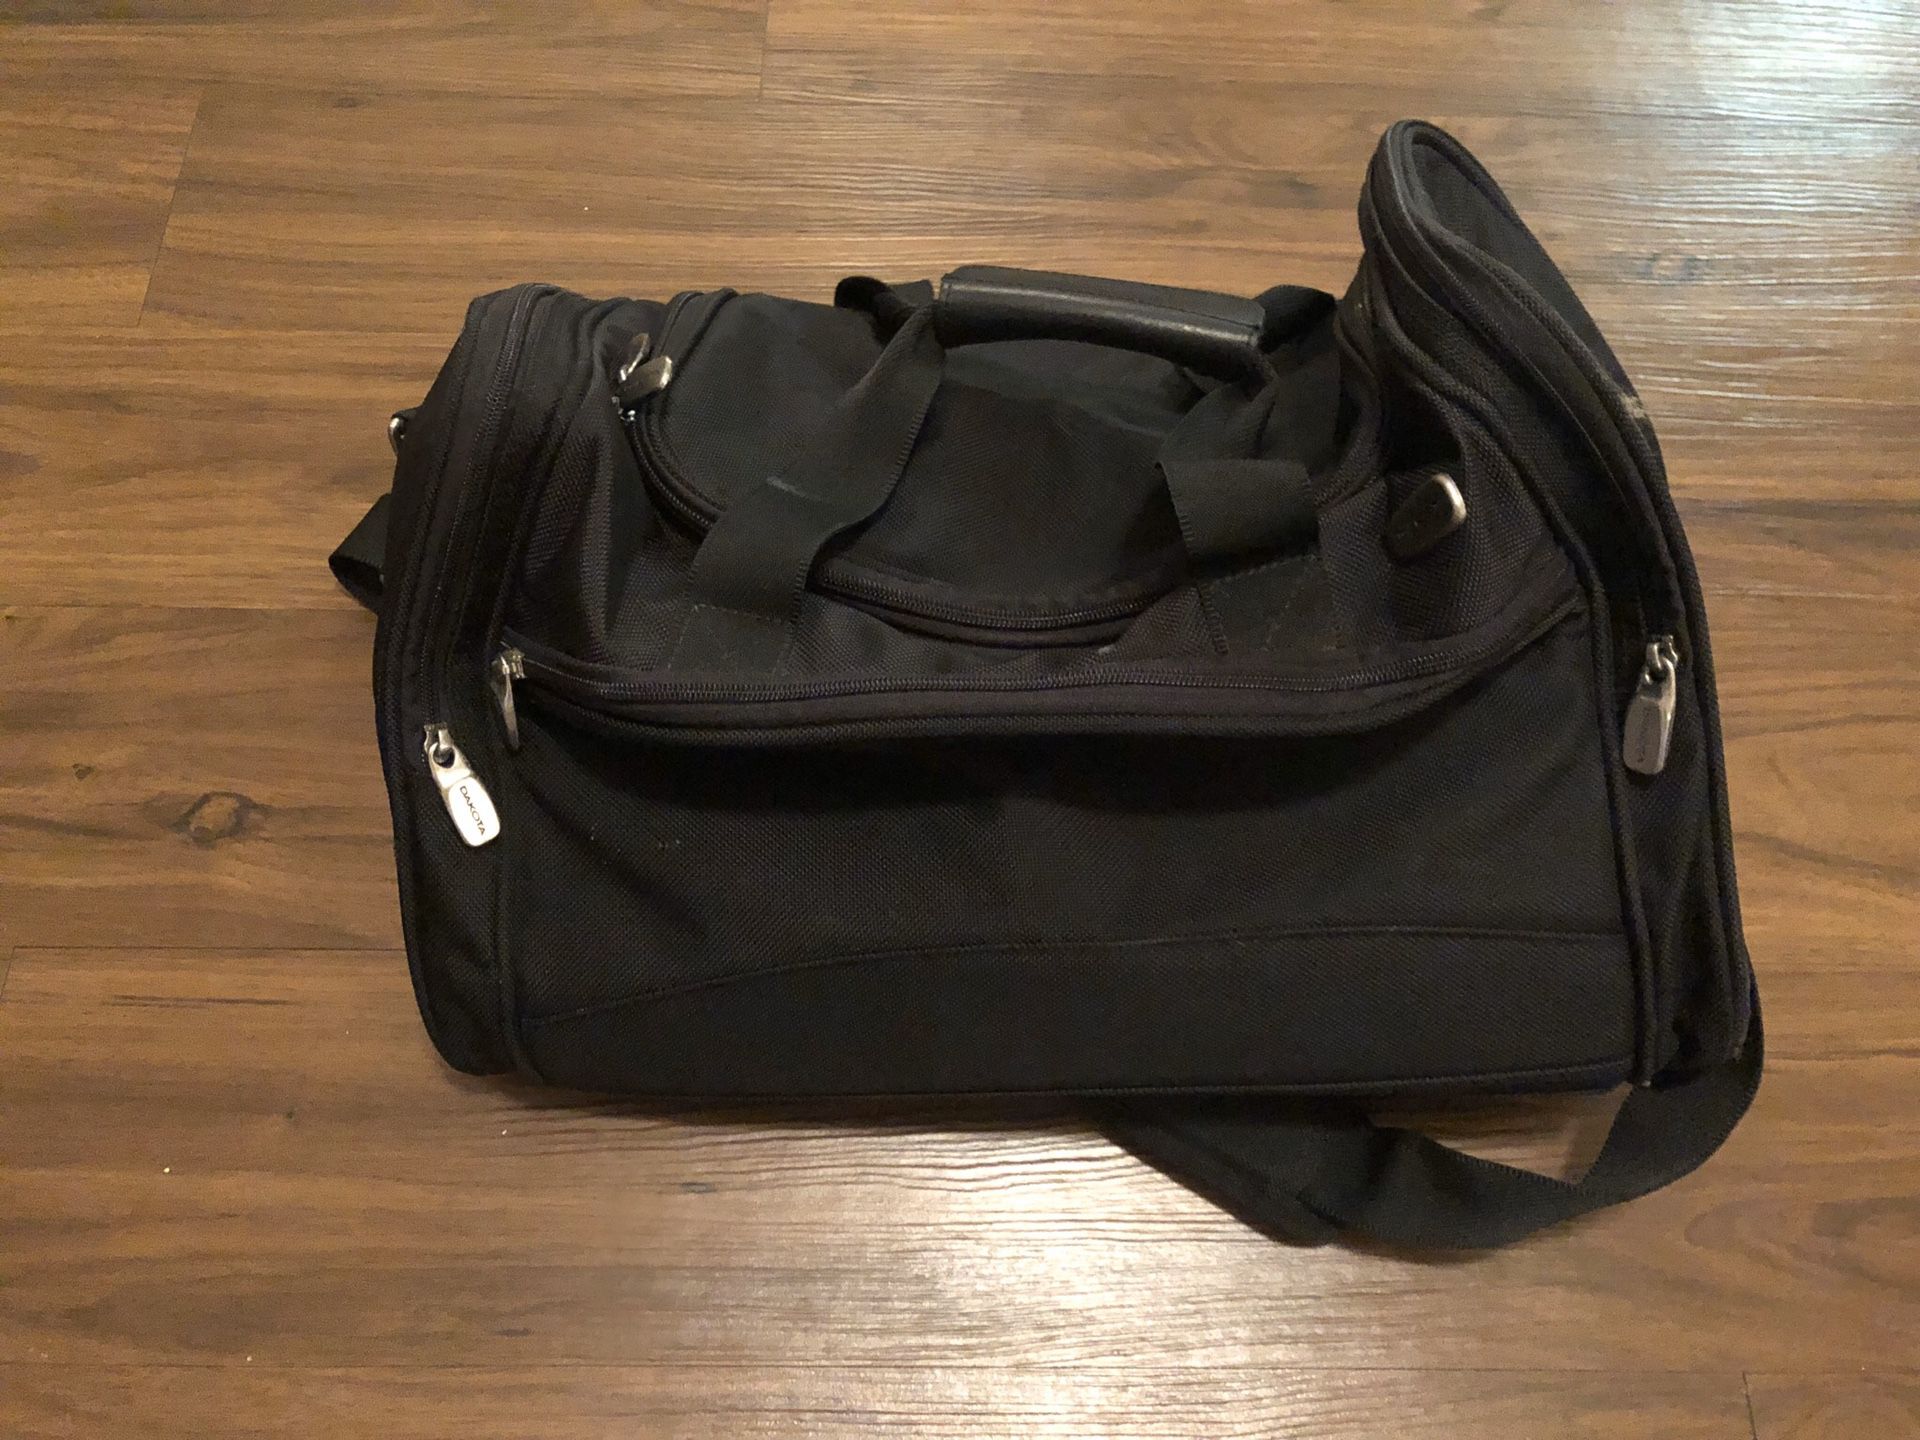 Duffle bag - perfect carry on